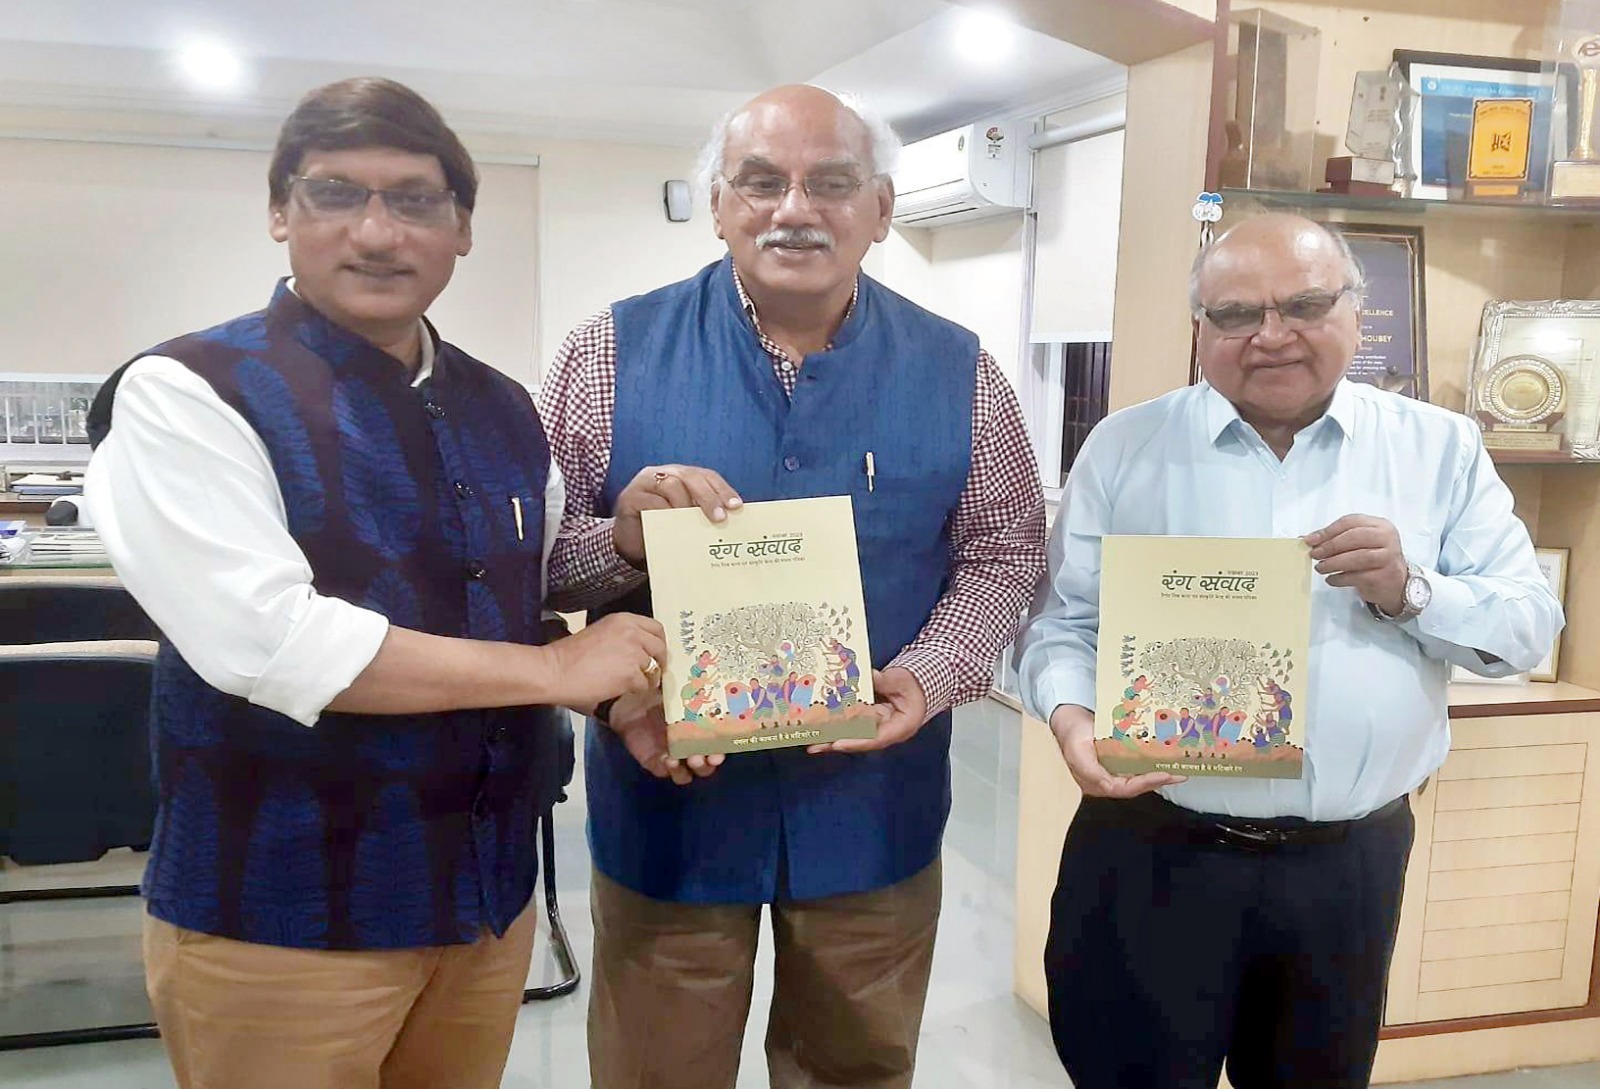 Colorful art special issue of 'Rang Samvad' launched